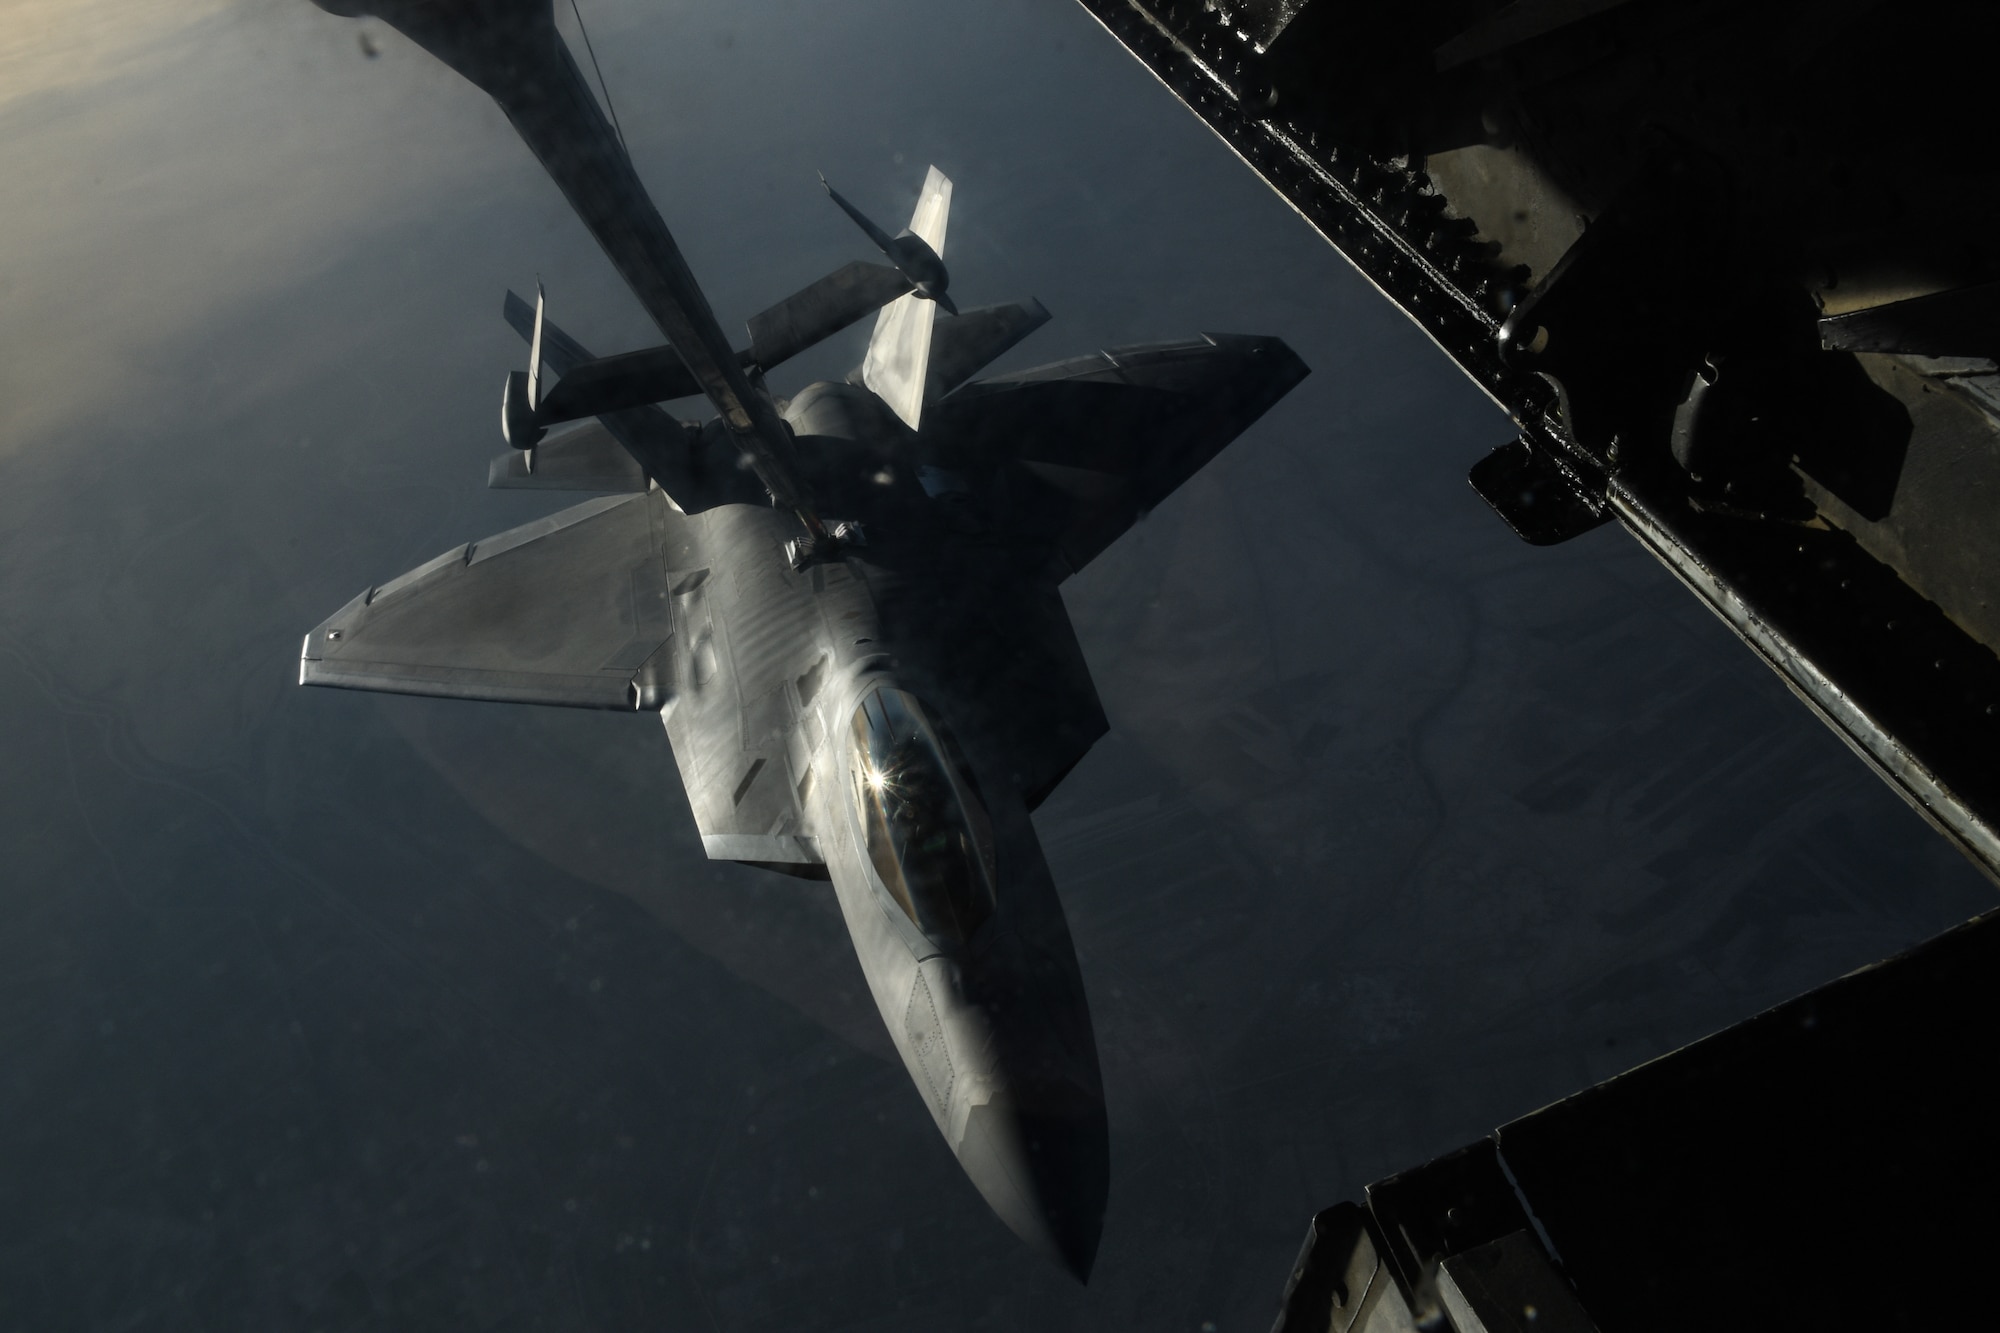 An U.S Air Force F-22 Raptor receives fuel from a KC-10 Extender during a mission in support of Operation Inherent Resolve over Iraq, Feb. 2, 2018. The F-22 performs both air-to-air and air-to-ground missions. (U.S. Air National Guard photo by Staff Sgt. Colton Elliott)